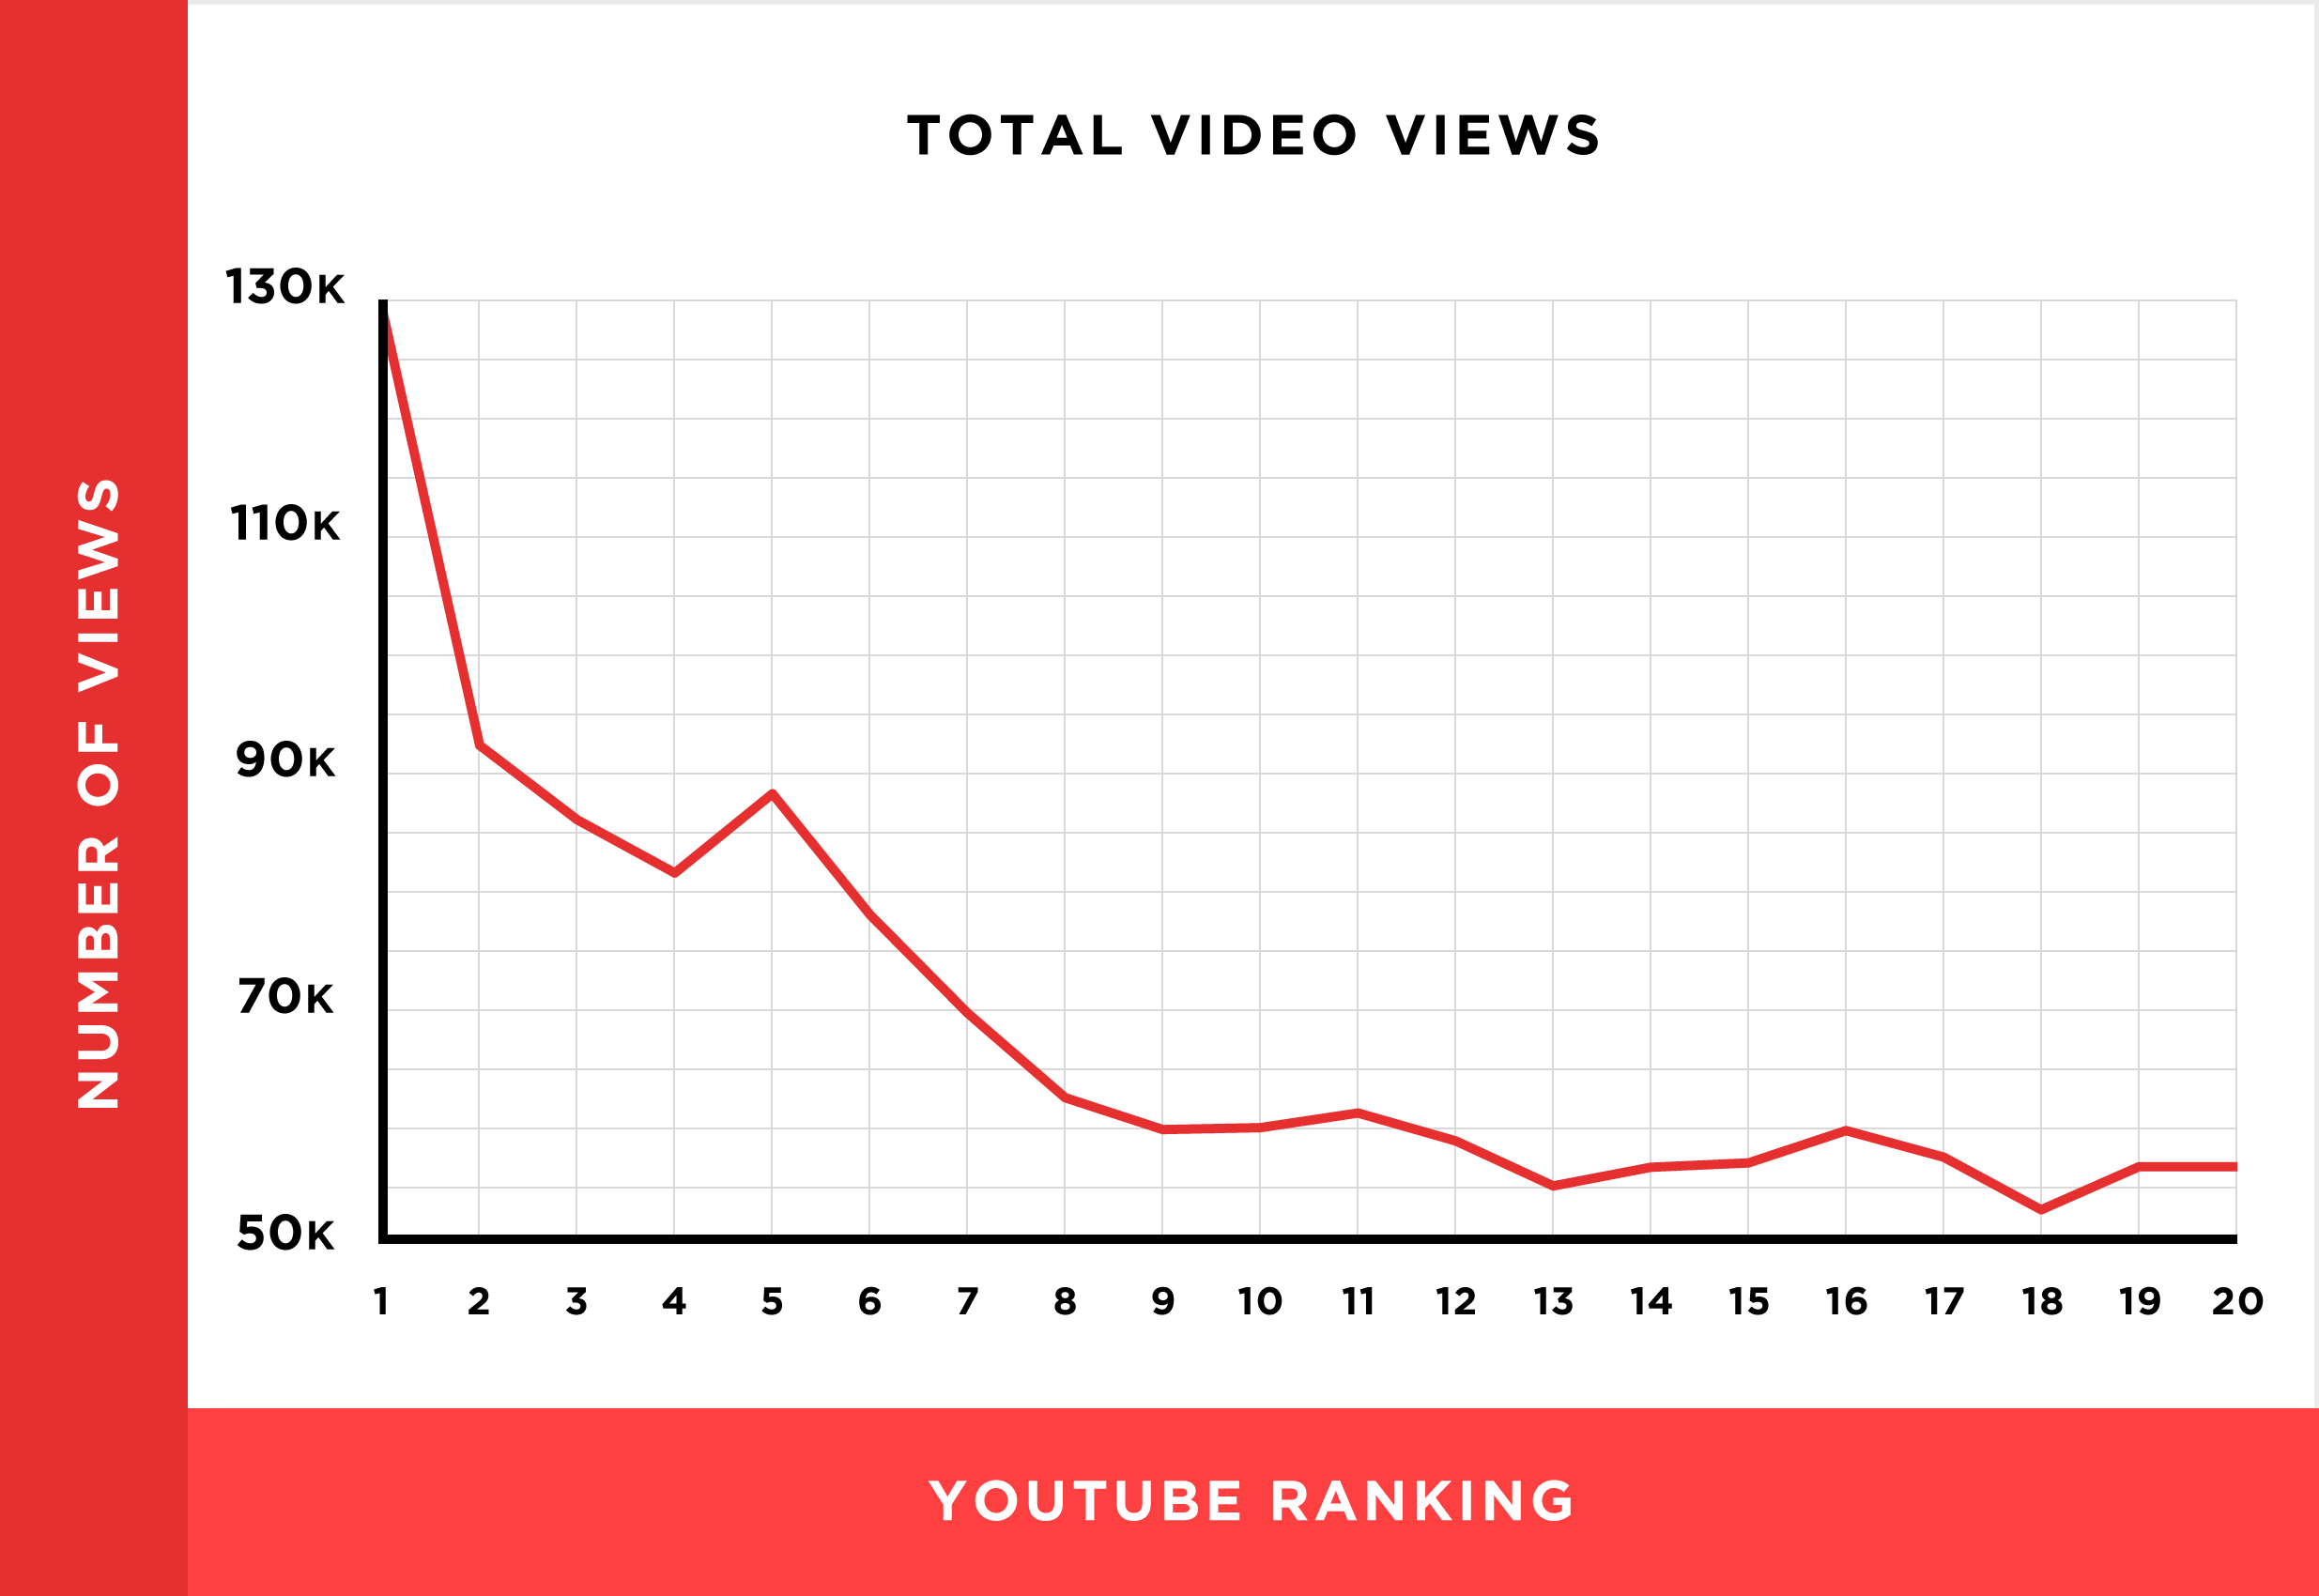 Data Showing Ranking of Video-Based on Views